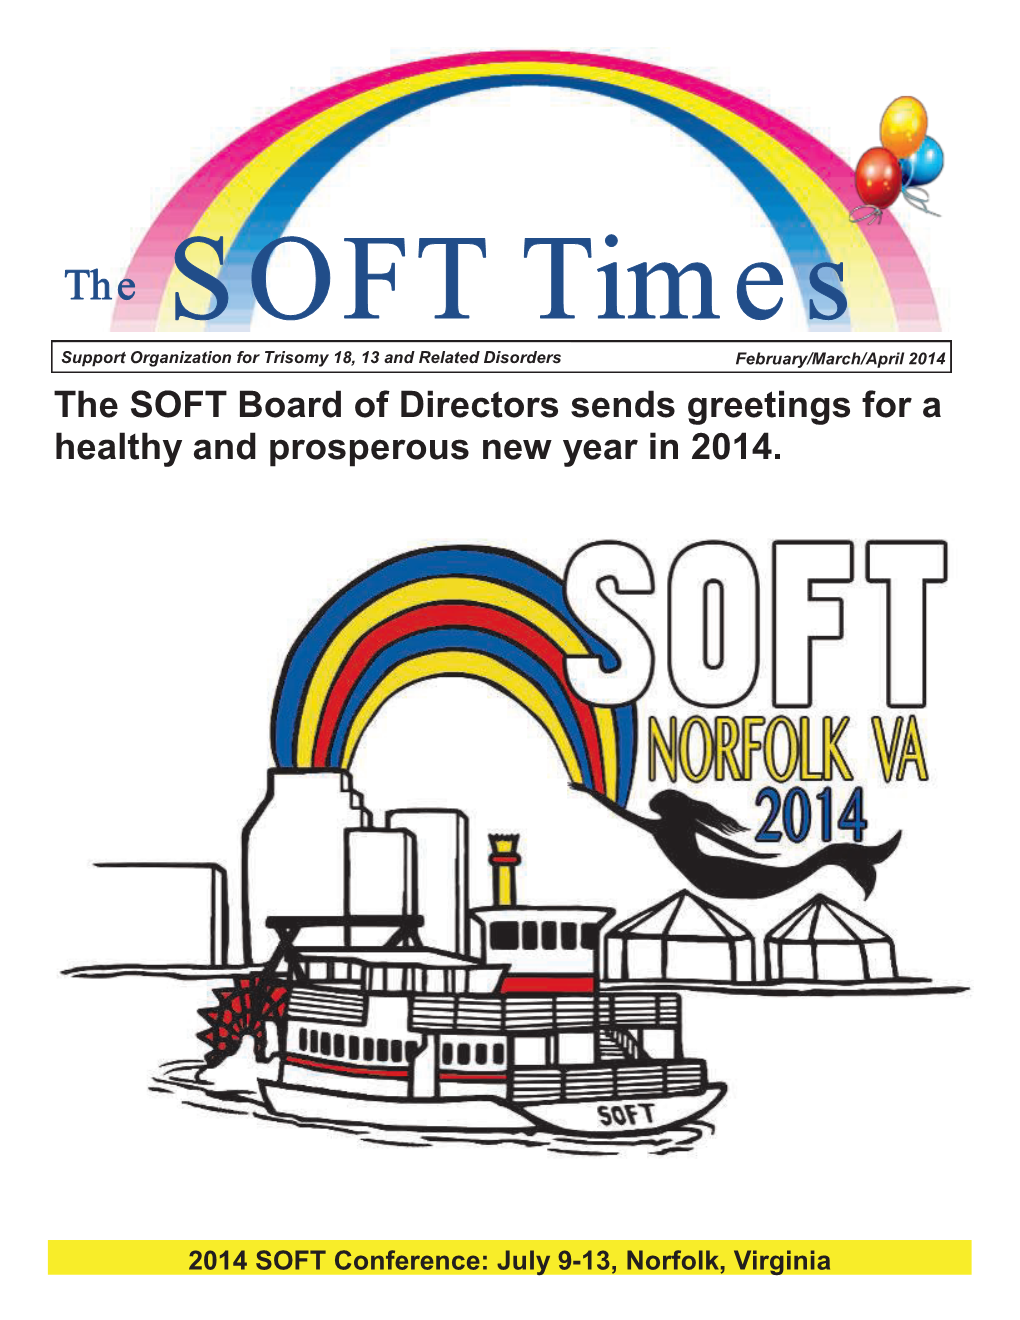 The SOFT Board of Directors Sends Greetings for a Healthy and Prosperous New Year in 2014